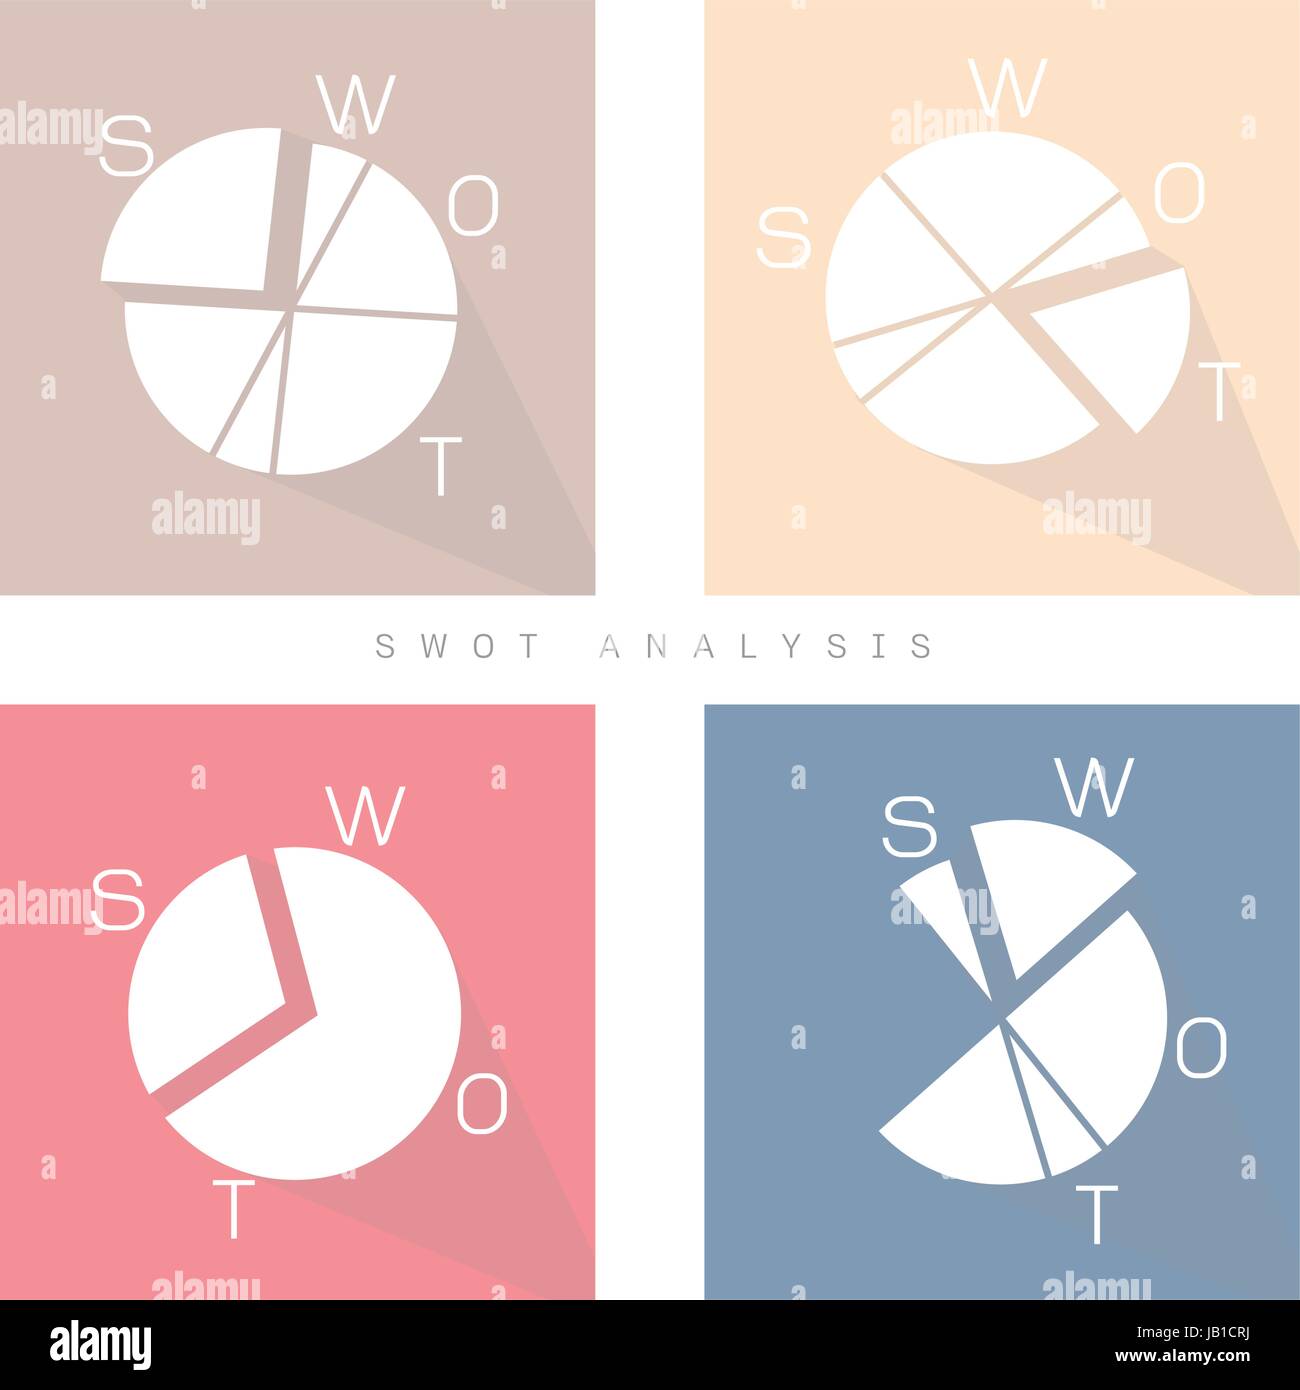 SWOT Analysis Matrix Round Chart of A Structured Planning Method for Evaluate Strengths, Weaknesses, Opportunities and Threats Involved in Business Pr Stock Vector